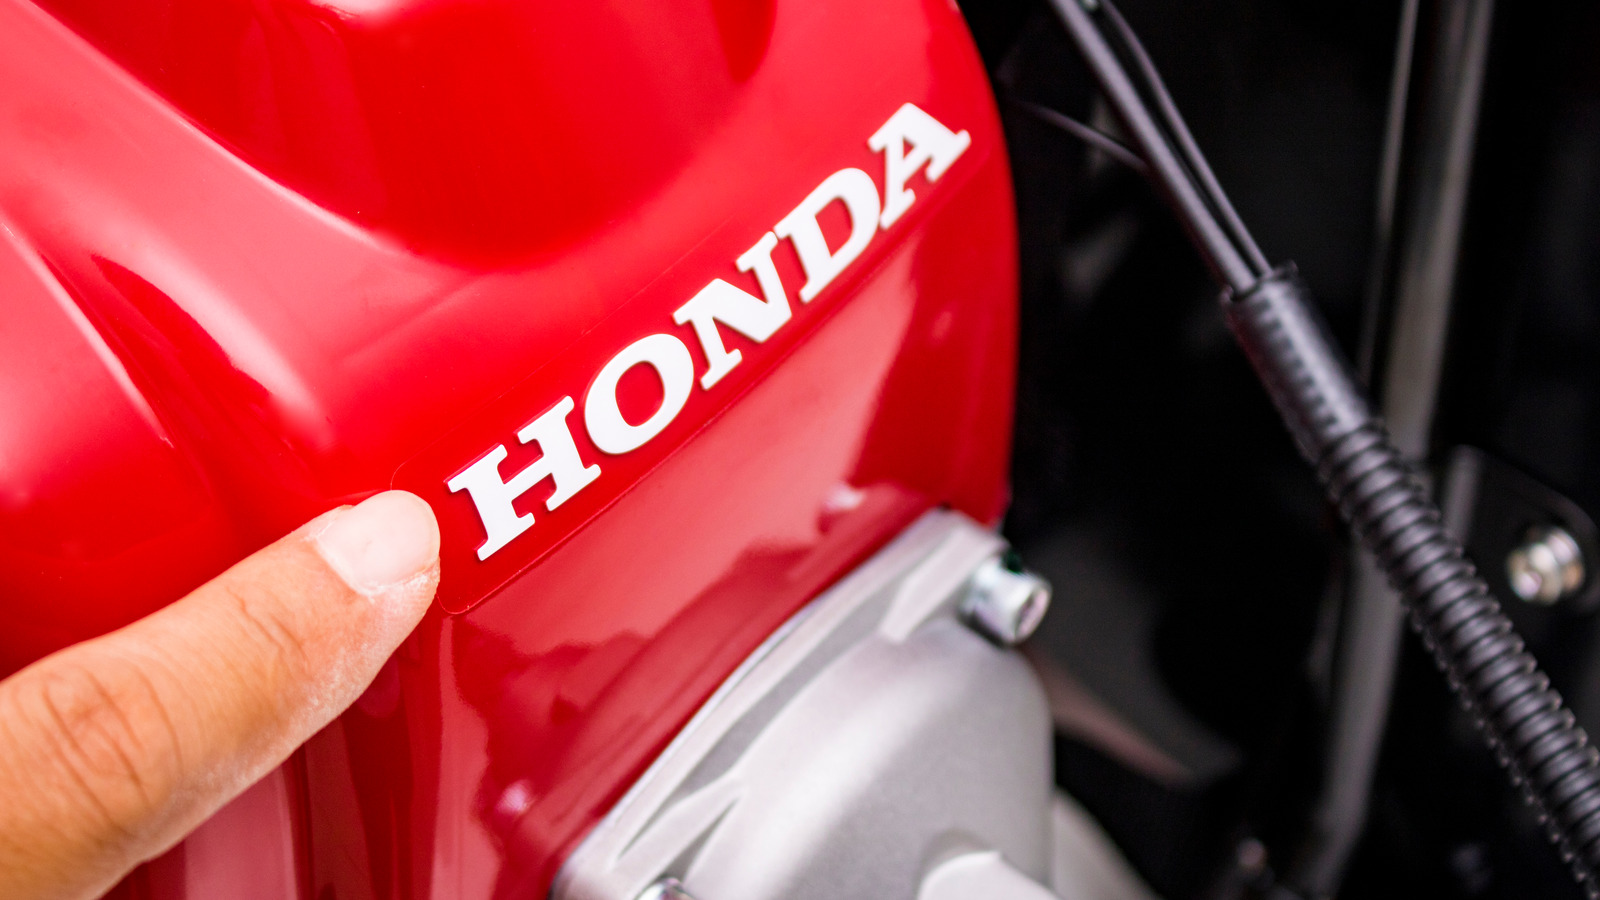 What Is Honda's Top-Rated Lawn Mower And How Much Does It Cost?